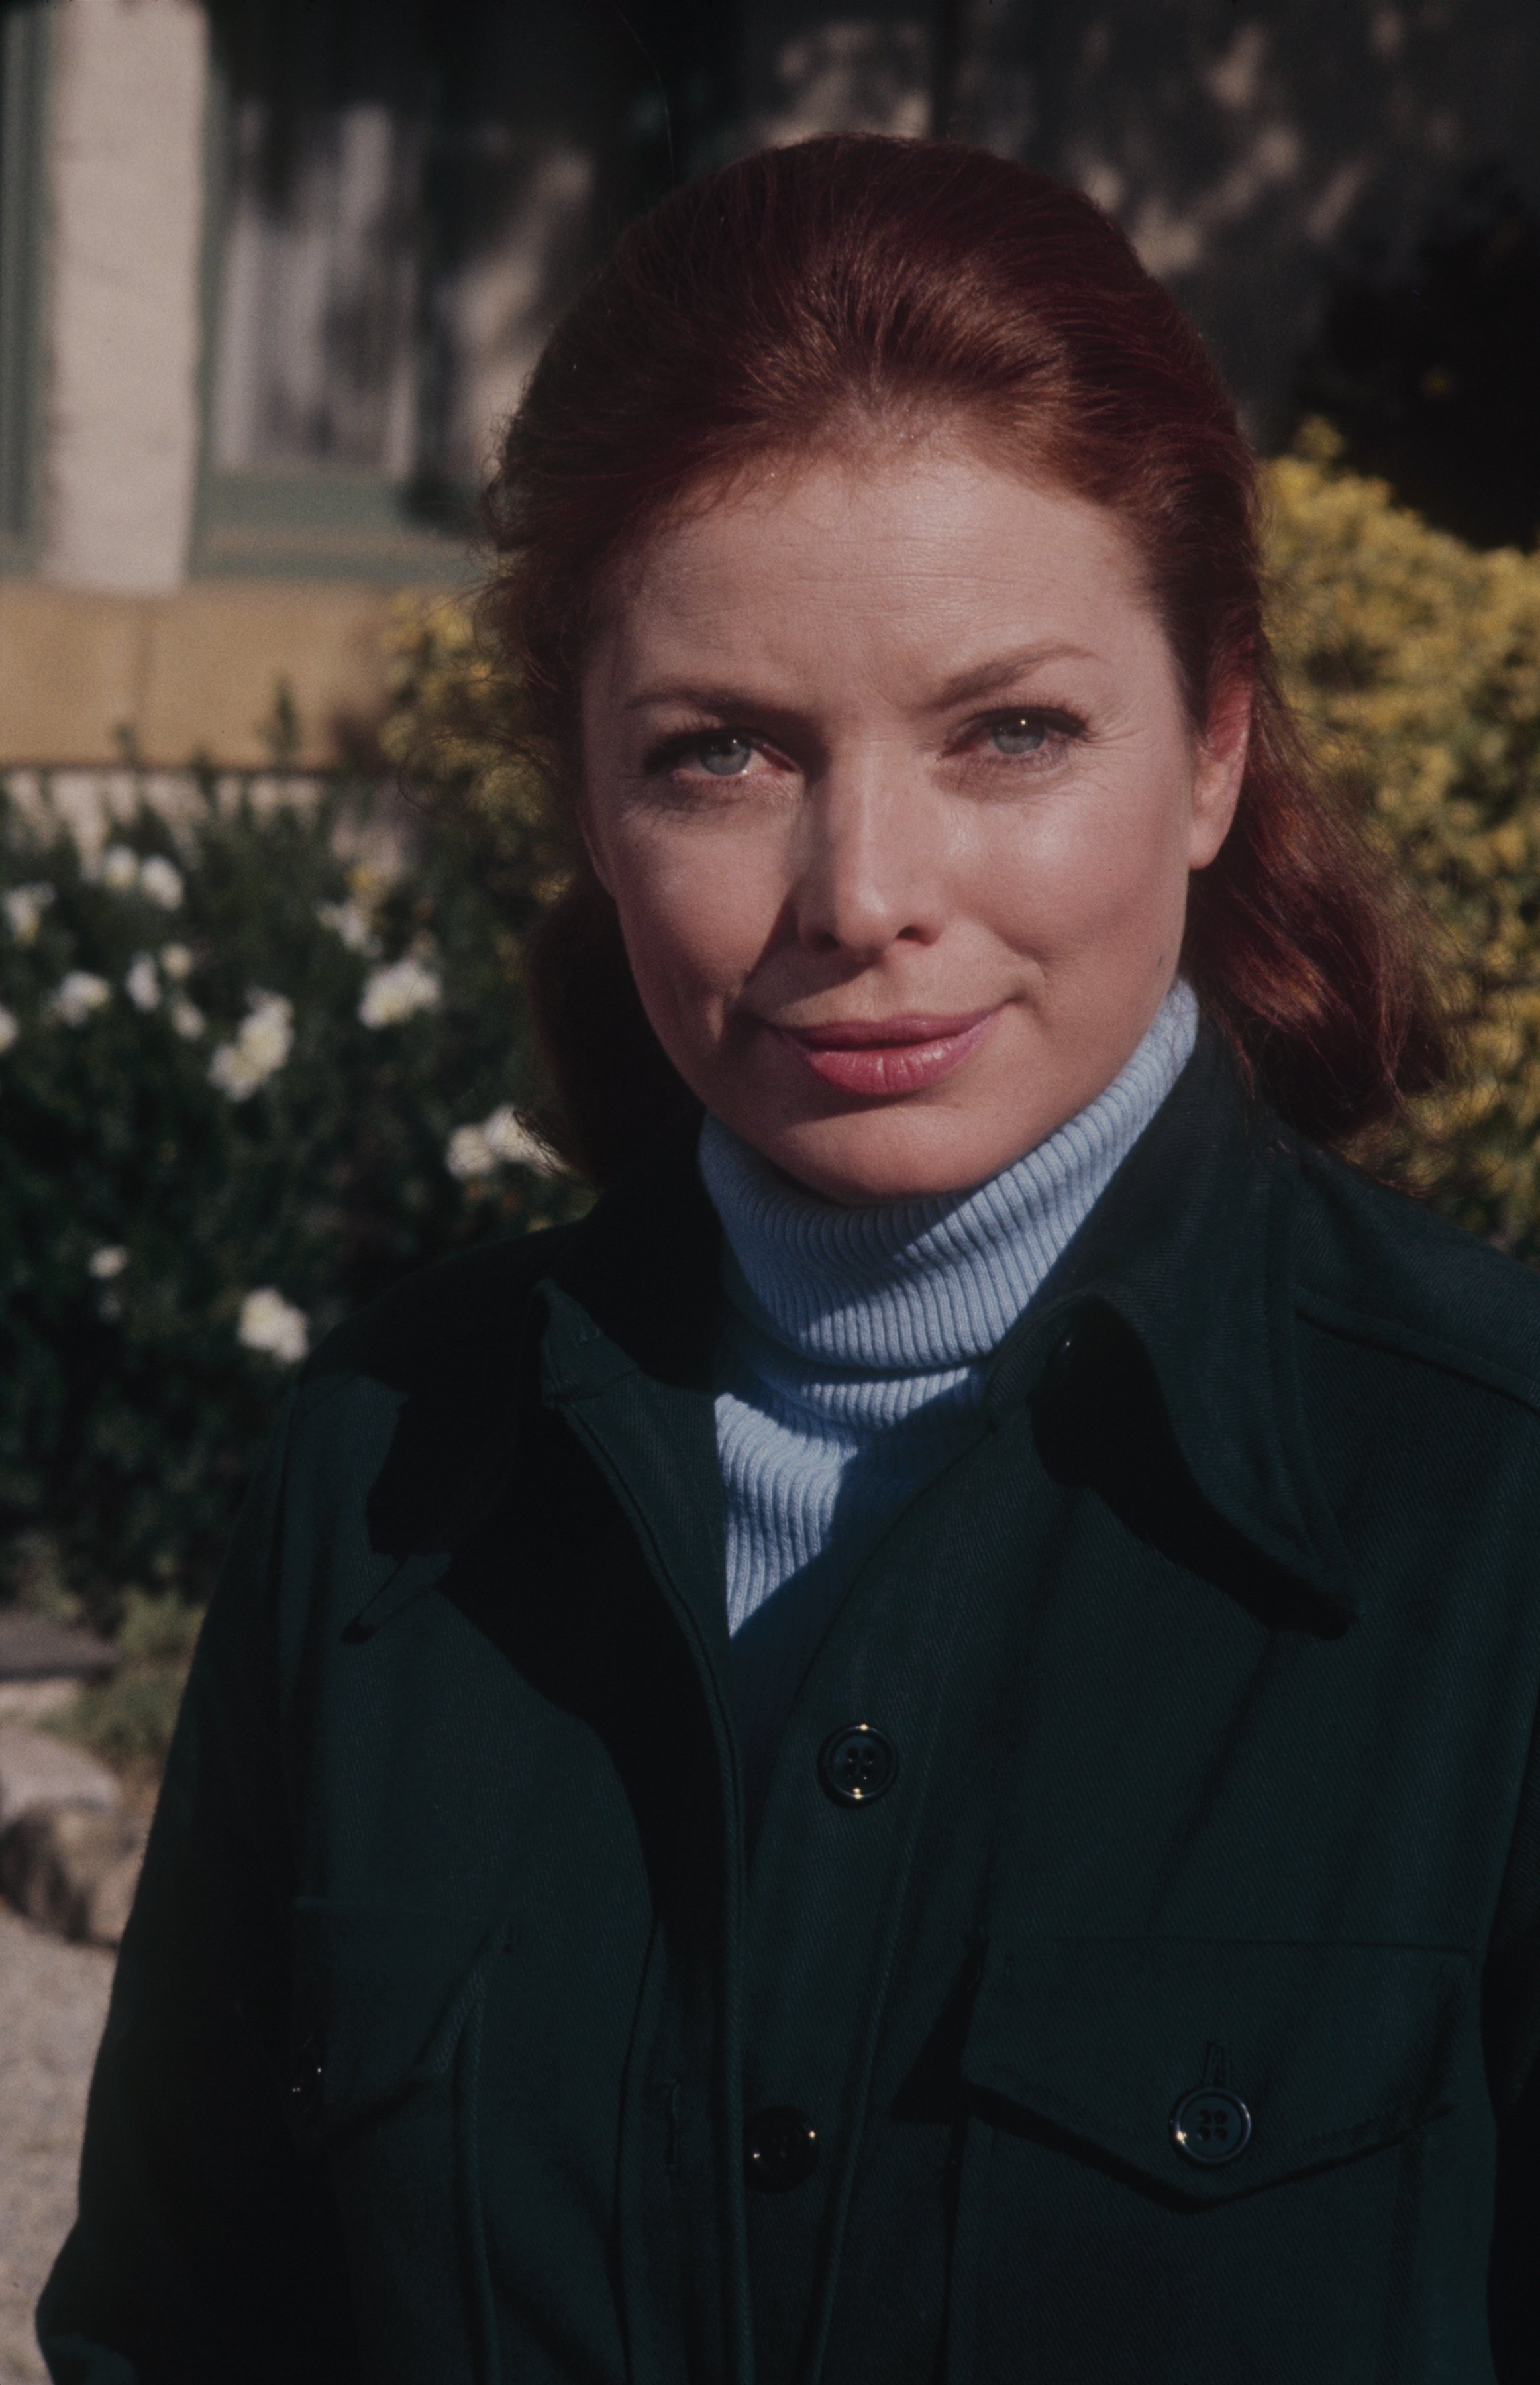 Actor Aneta Corsaut poses for a photo in a blue turtleneck, dark jacket, and her red hair pulled back, 1973